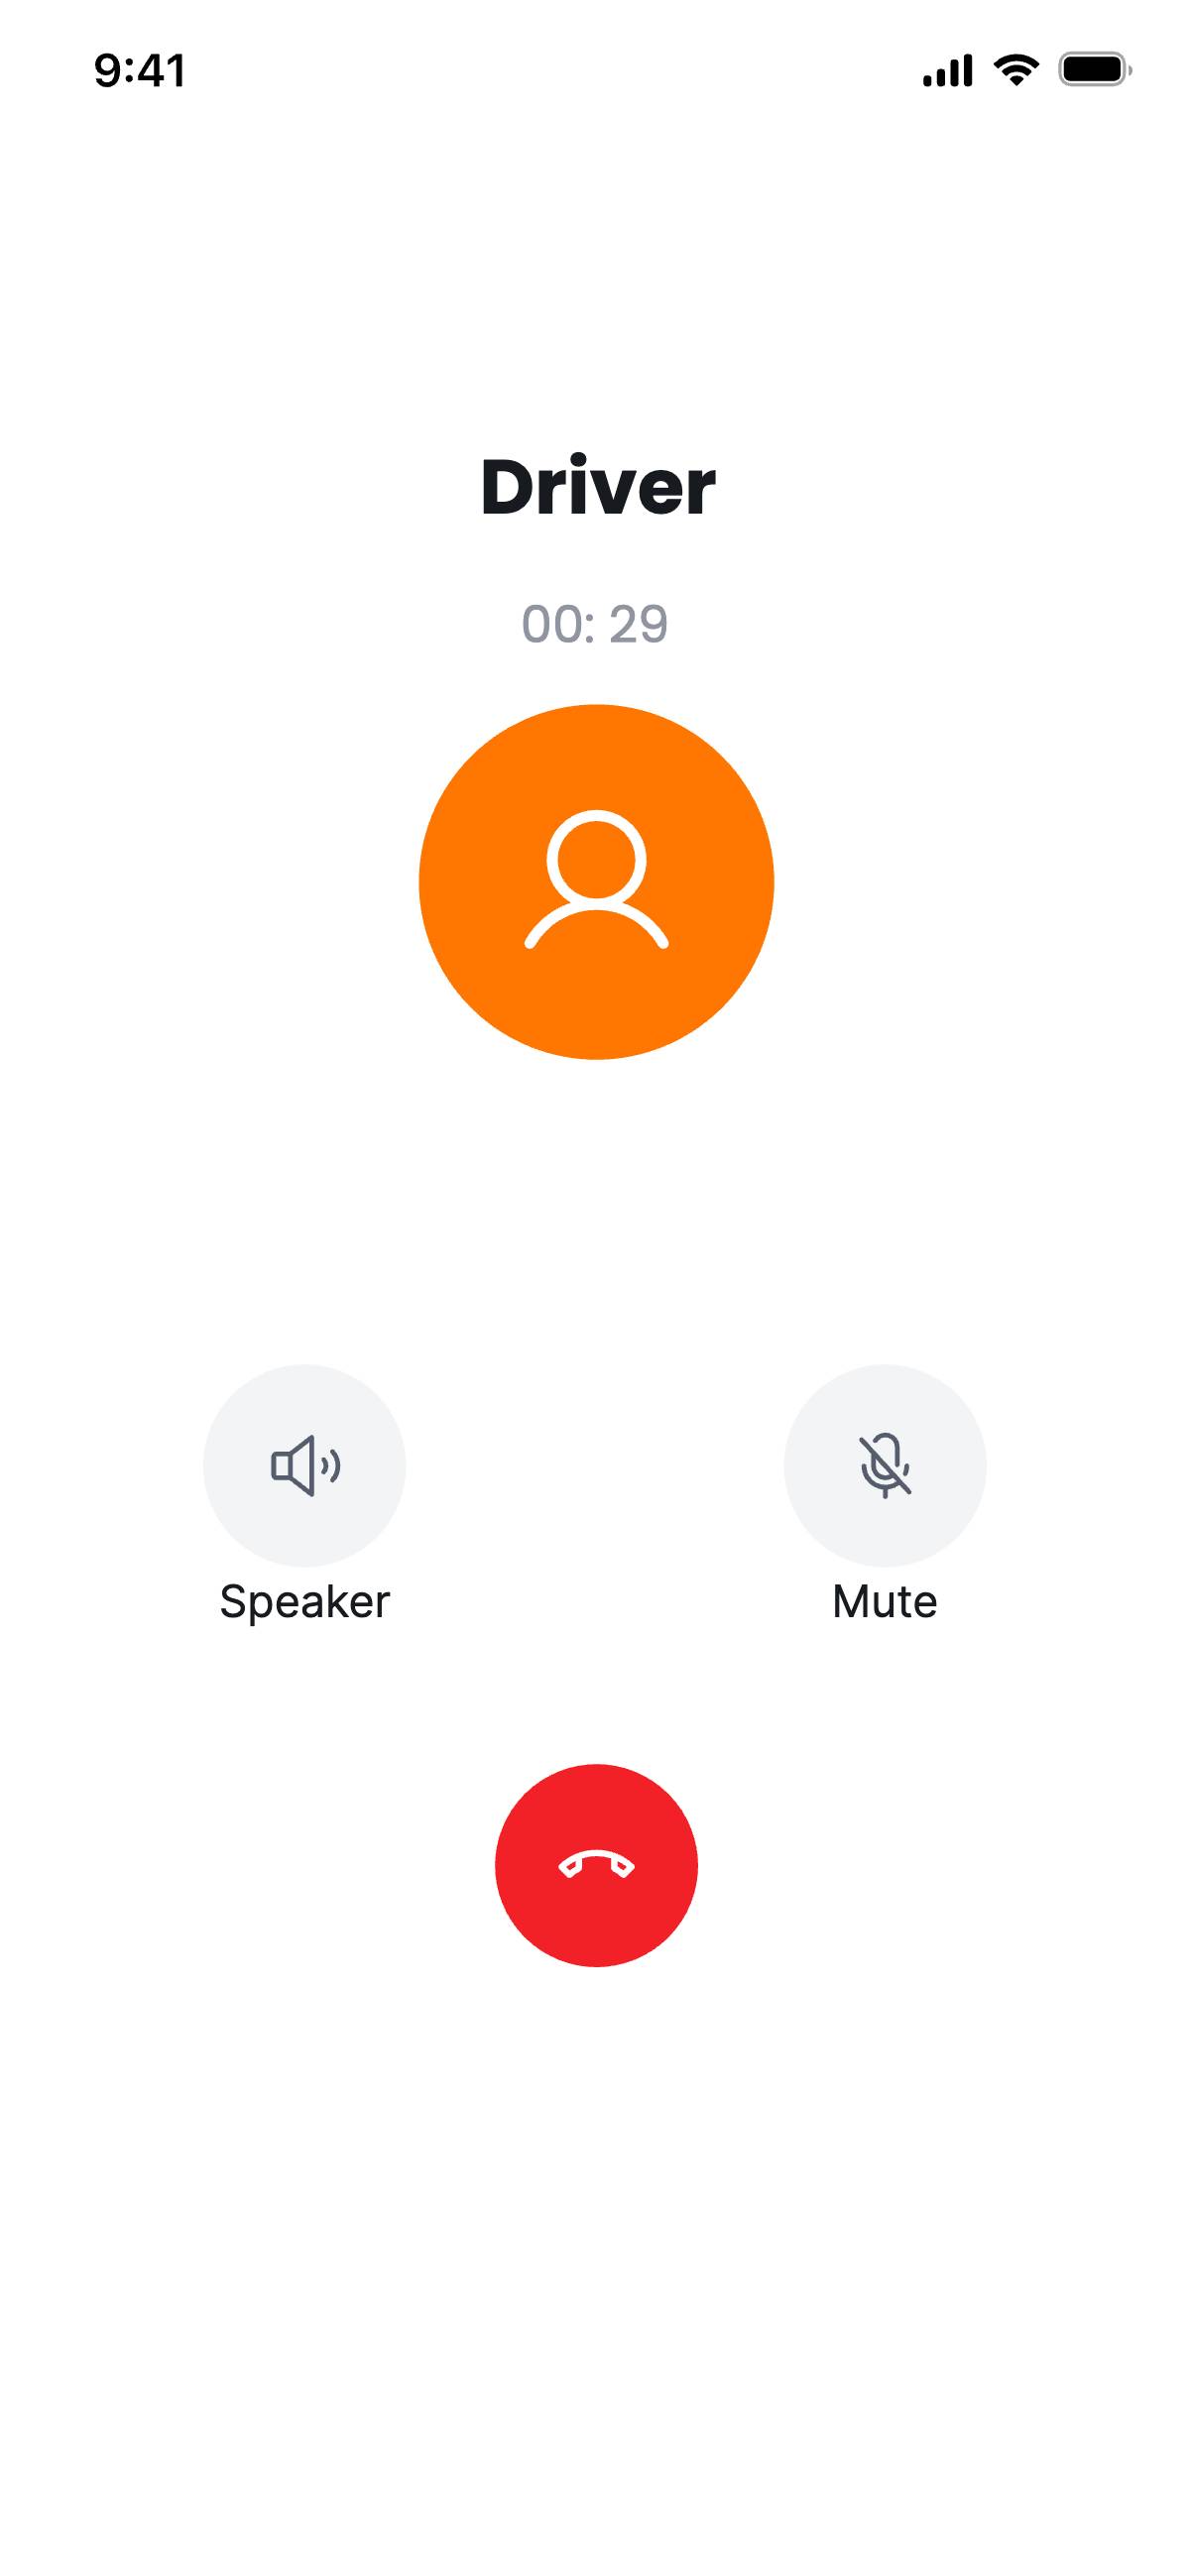 Audio call with  driver